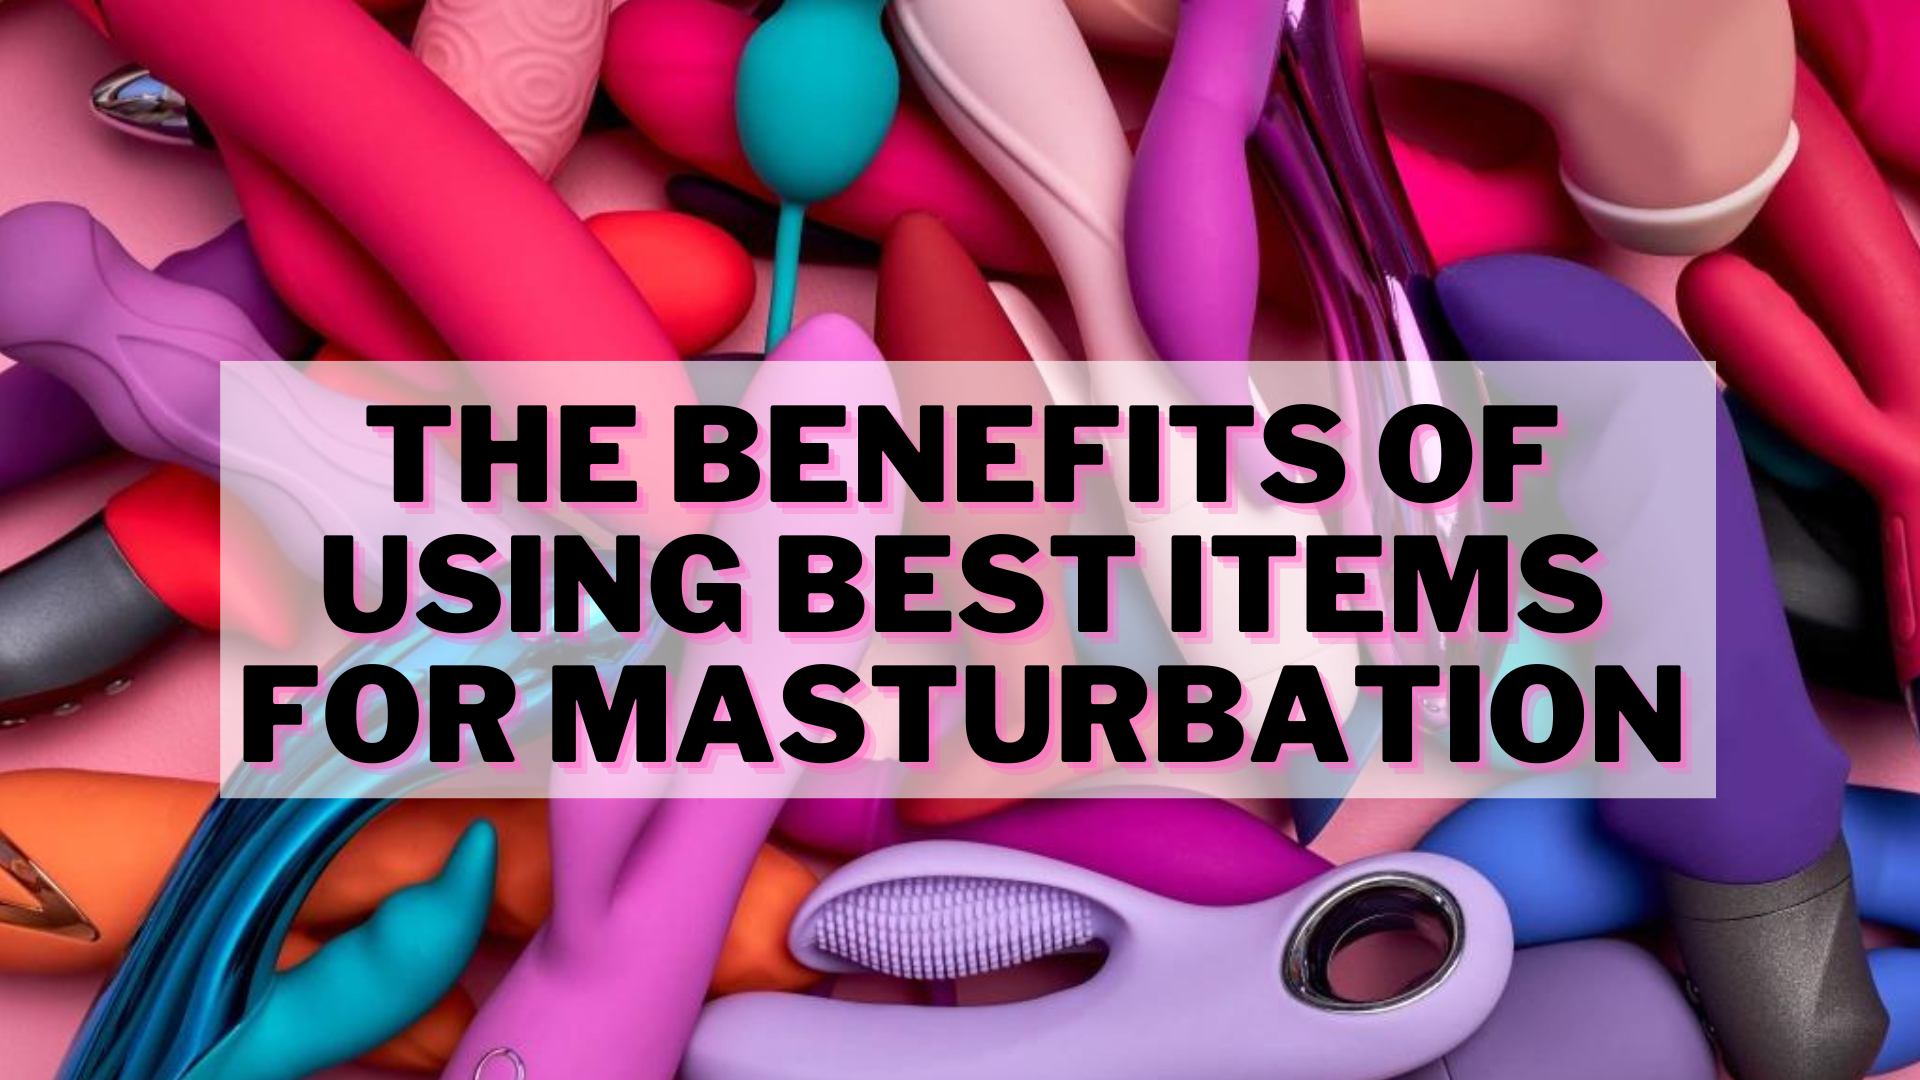 Different colors of Masturbation toys with words The Benefits Of Using Best Items For Masturbation